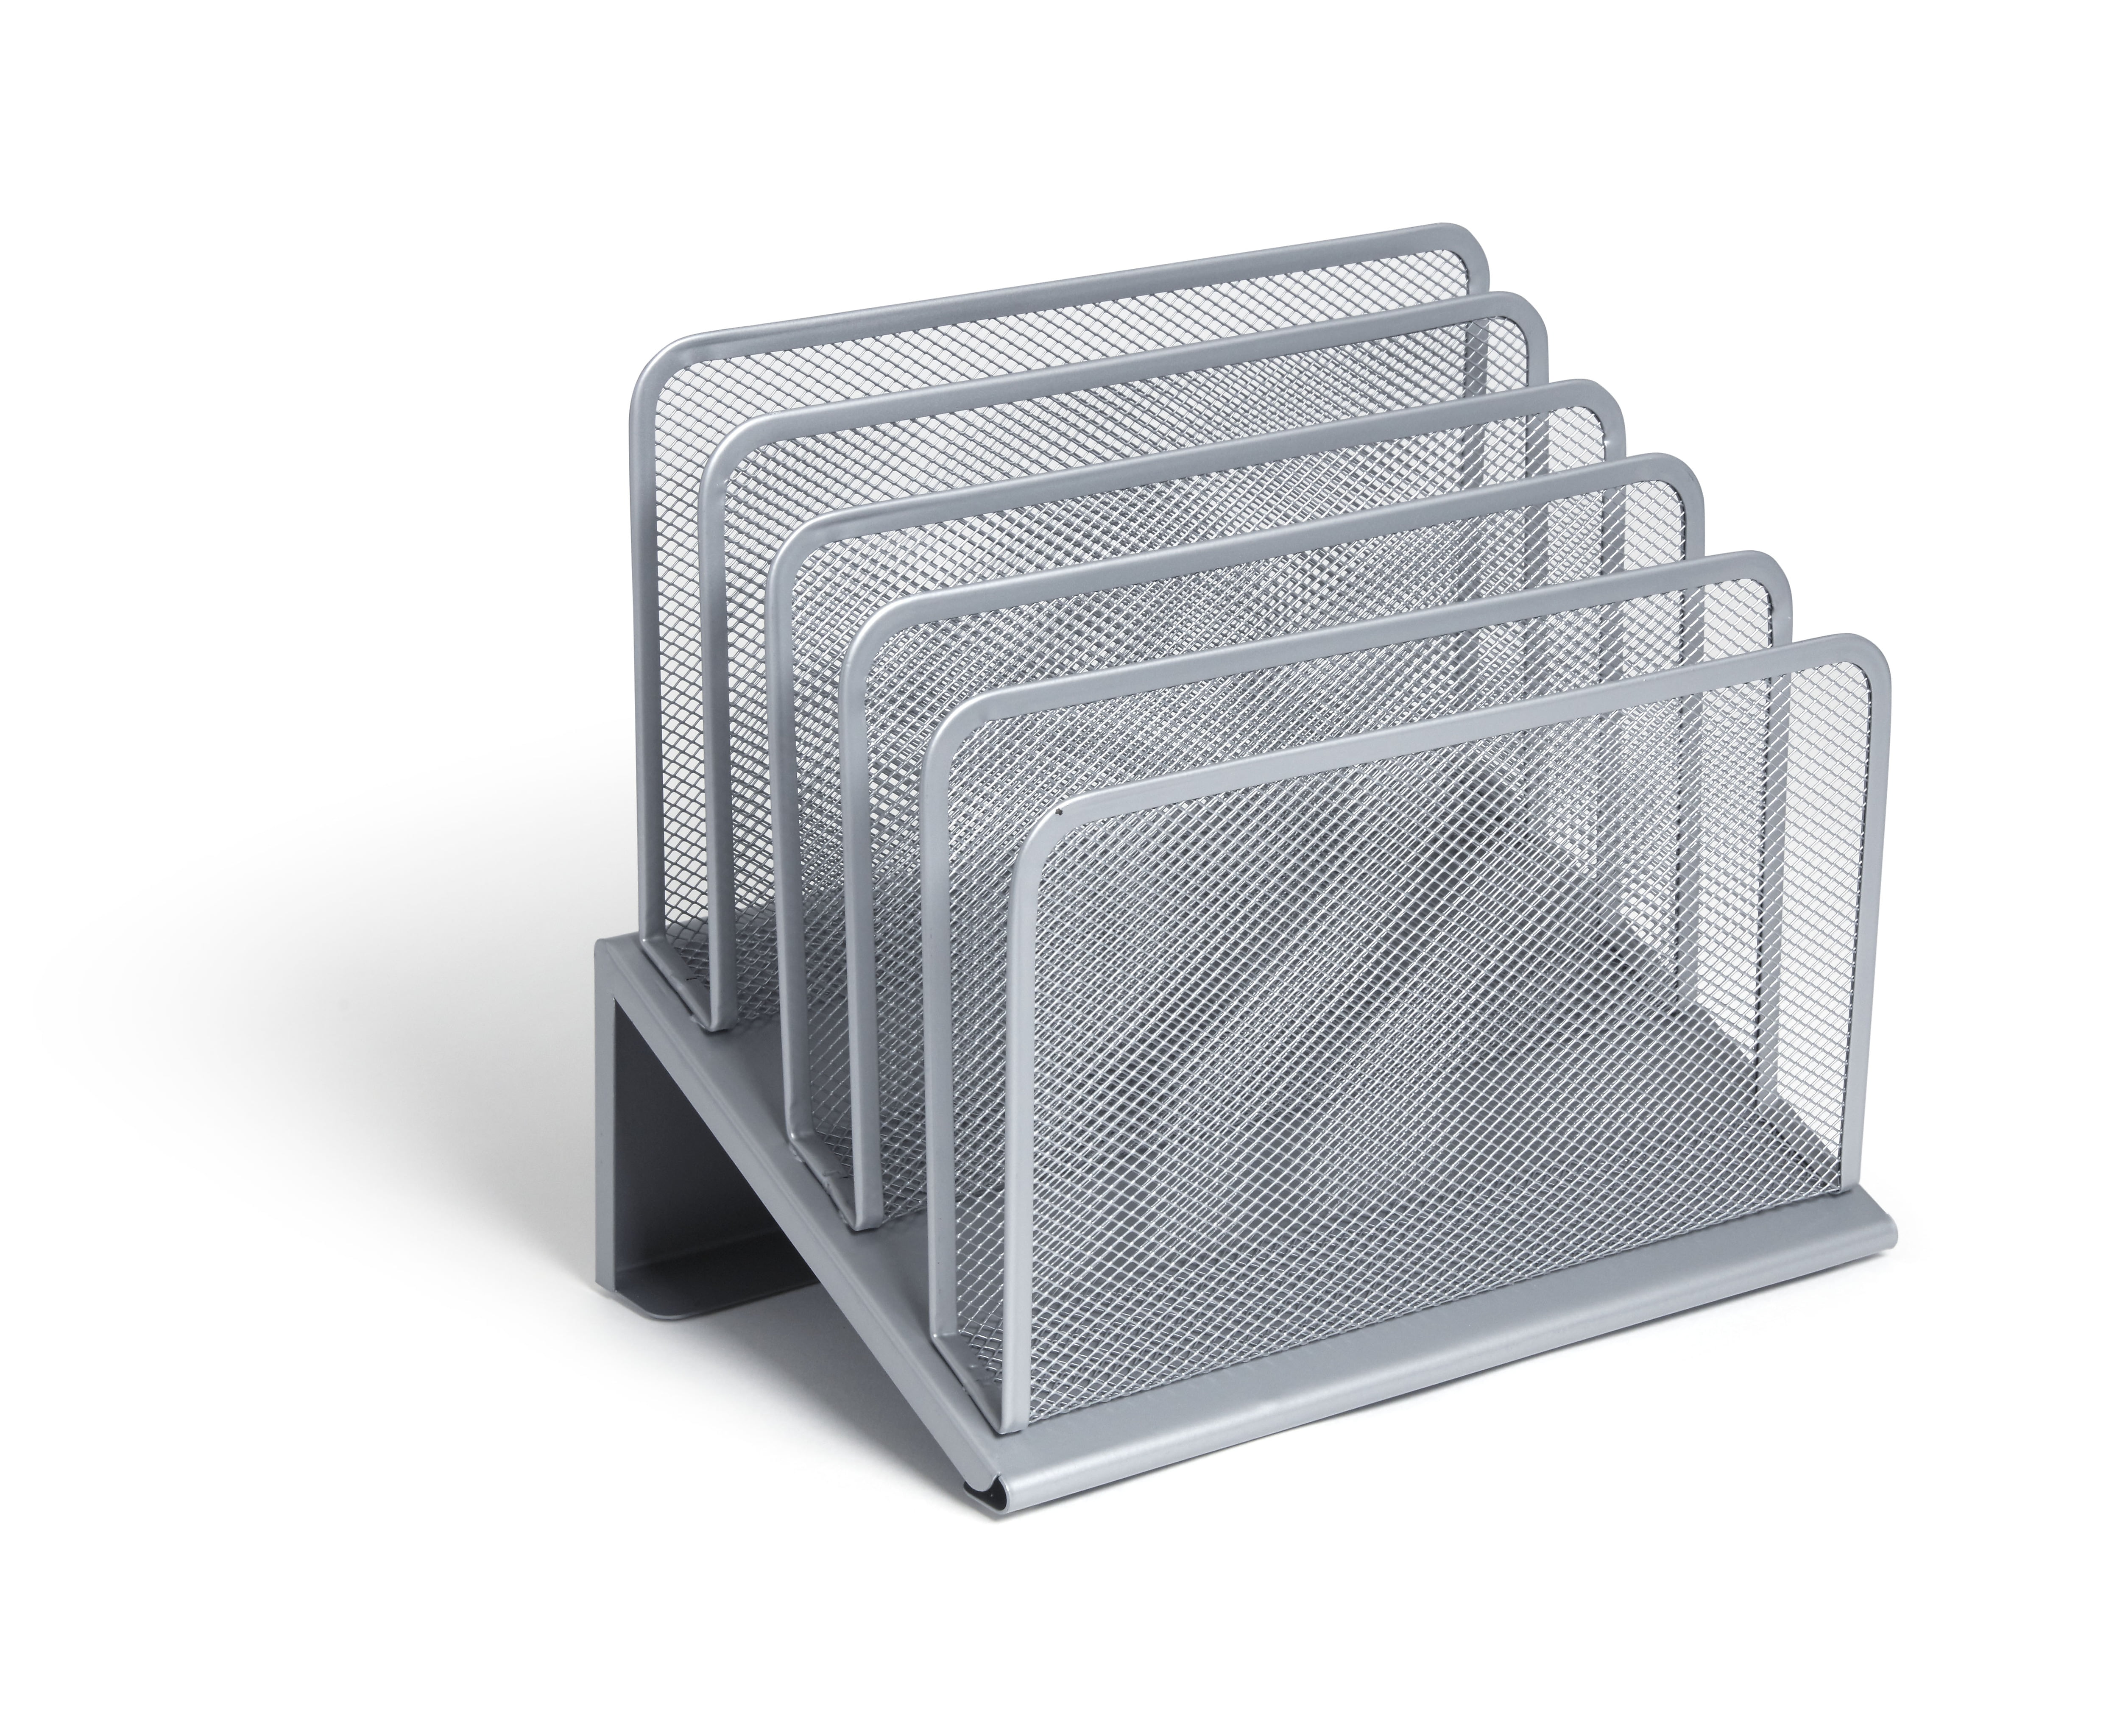 Inclined File Organizer by Mindspace Silver 5 Section Desktop Document Sorter The Mesh Collection